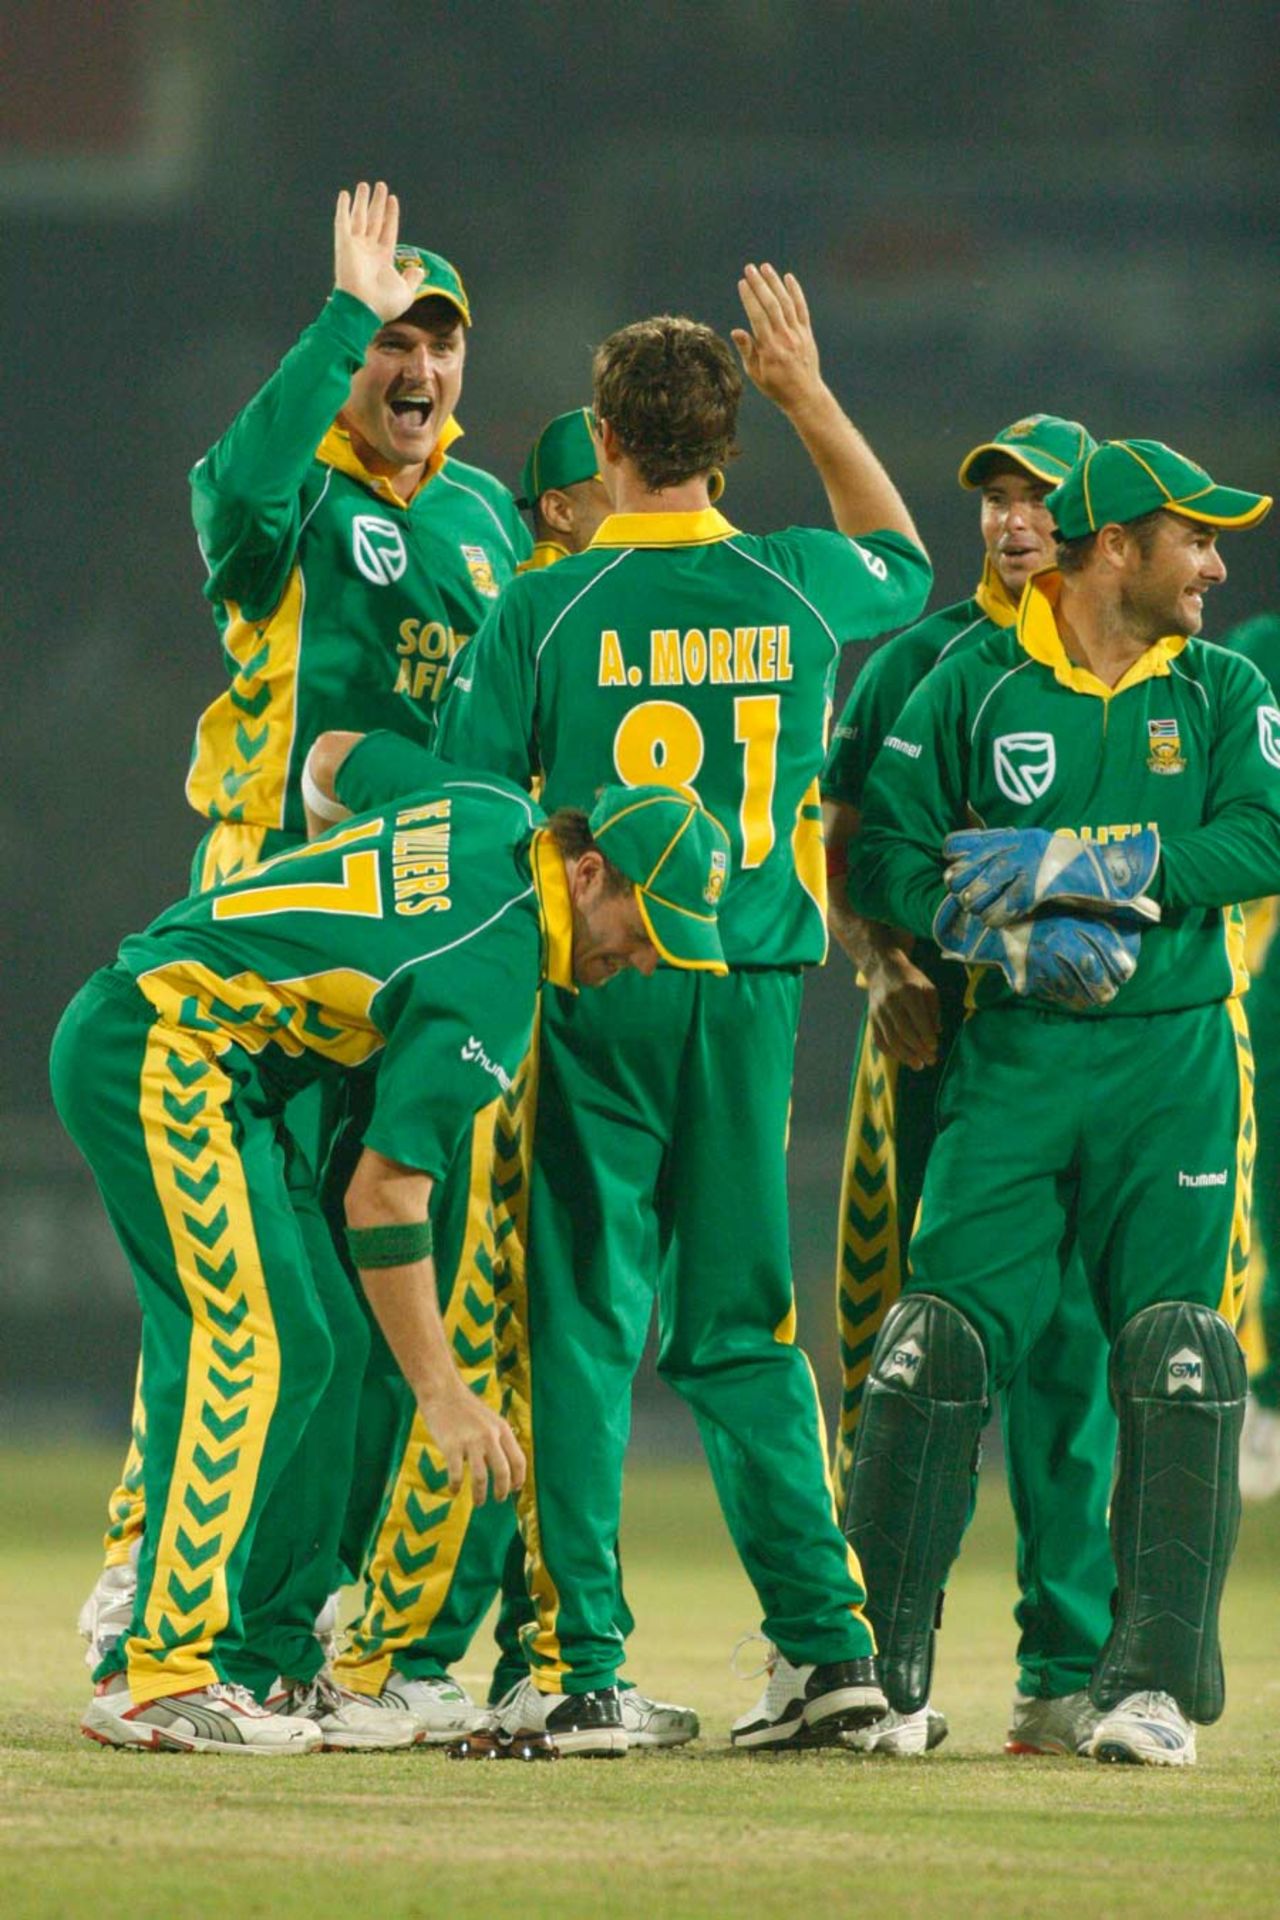 Graeme Smith and Albie Morkel celebrate the wicket of Iftikhar Anjum, Pakistan v South Africa, 5th ODI, Lahore, October 29, 2007